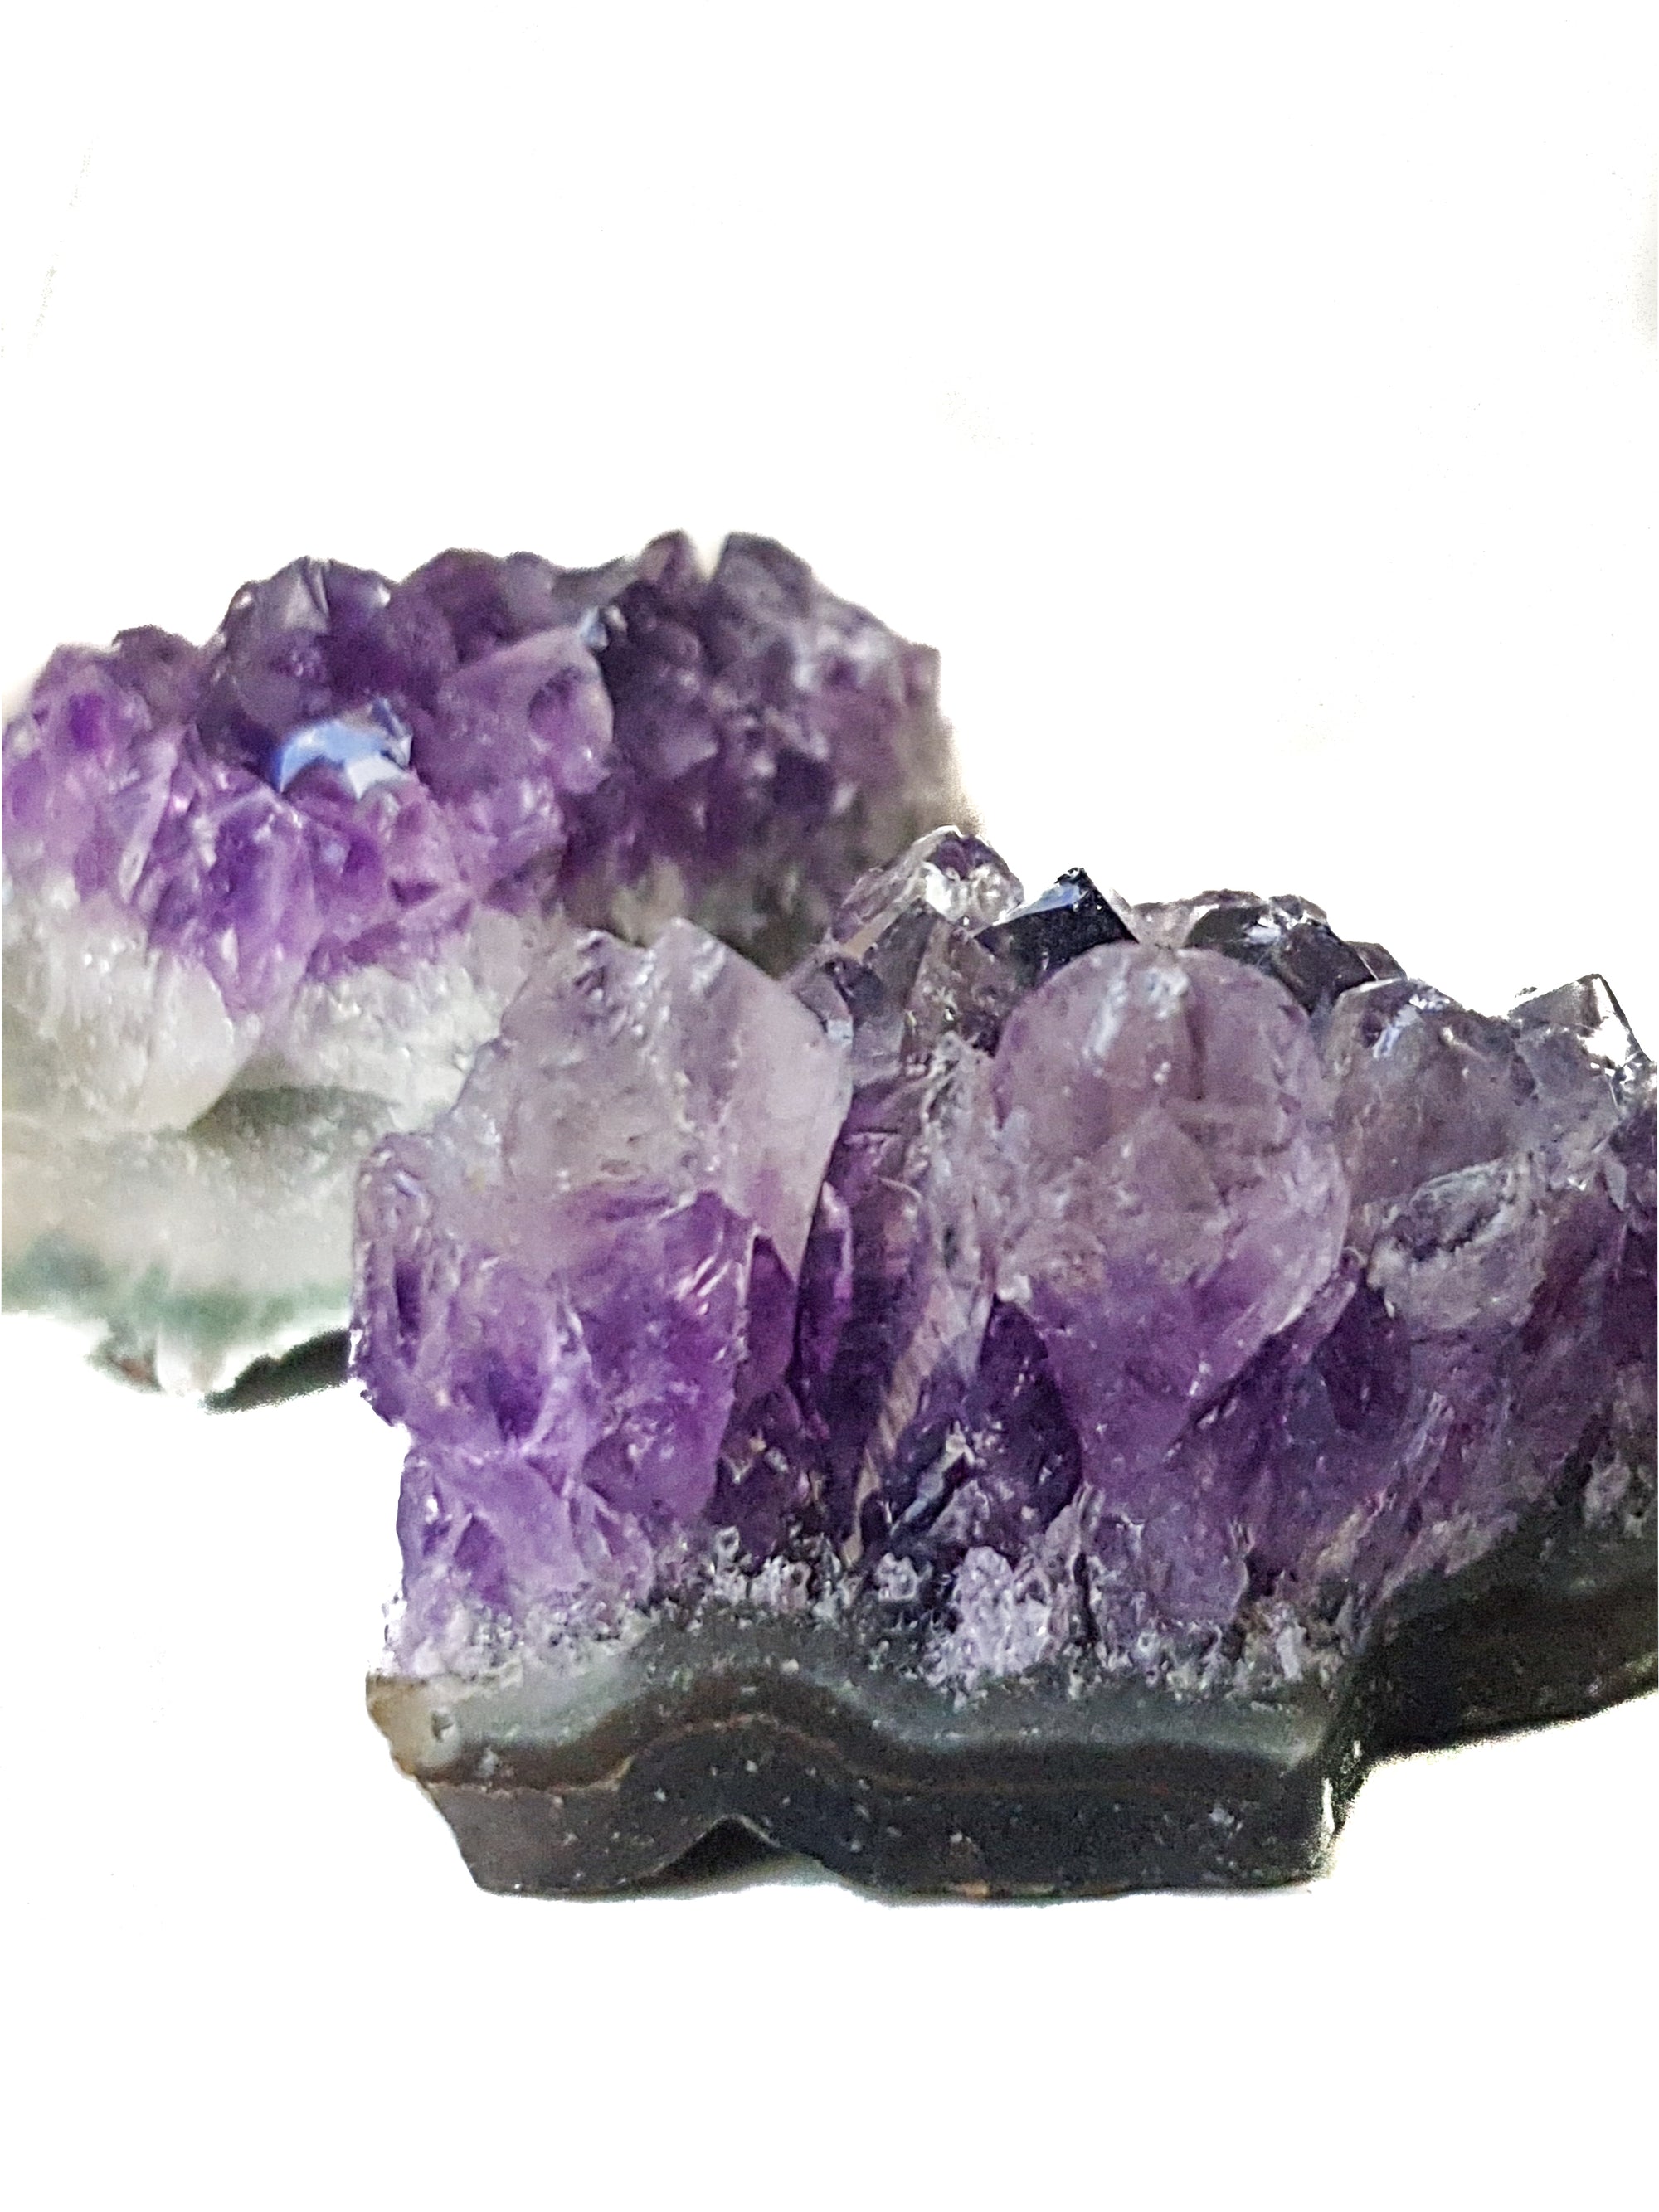 two pieces of druzy amethyst in close up